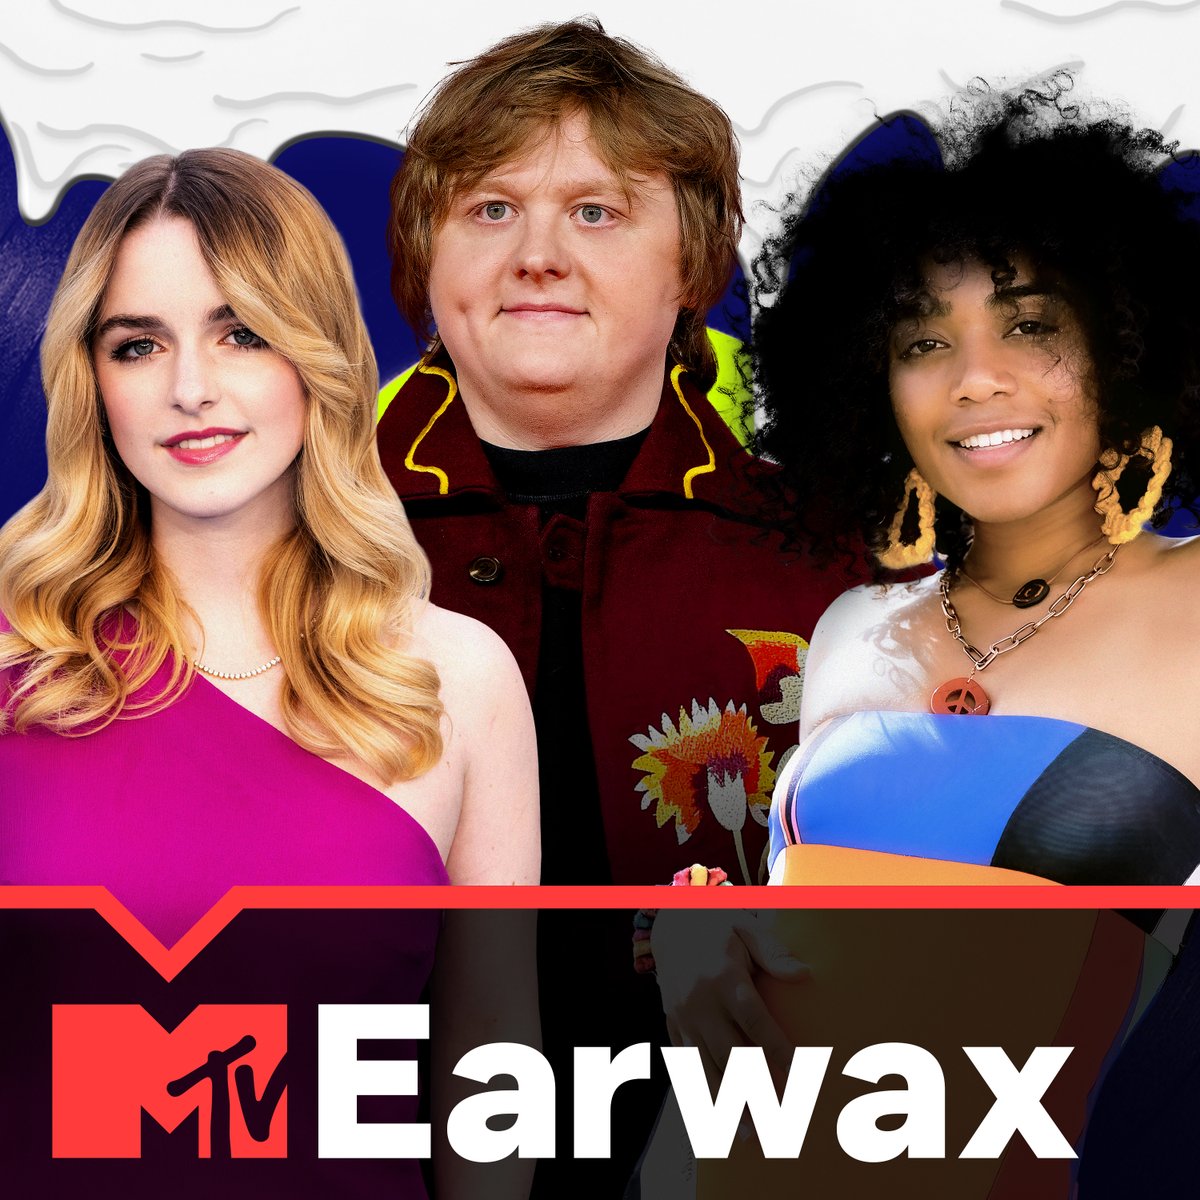 It's the first New Music Friday of 2024 – and I've got @MckennaGraceful, @LewisCapaldi, @whoisumi & more on my #Earwax playlist 🎉 Spotify: open.spotify.com/playlist/6Vayw… Apple Music: music.apple.com/us/playlist/mt…